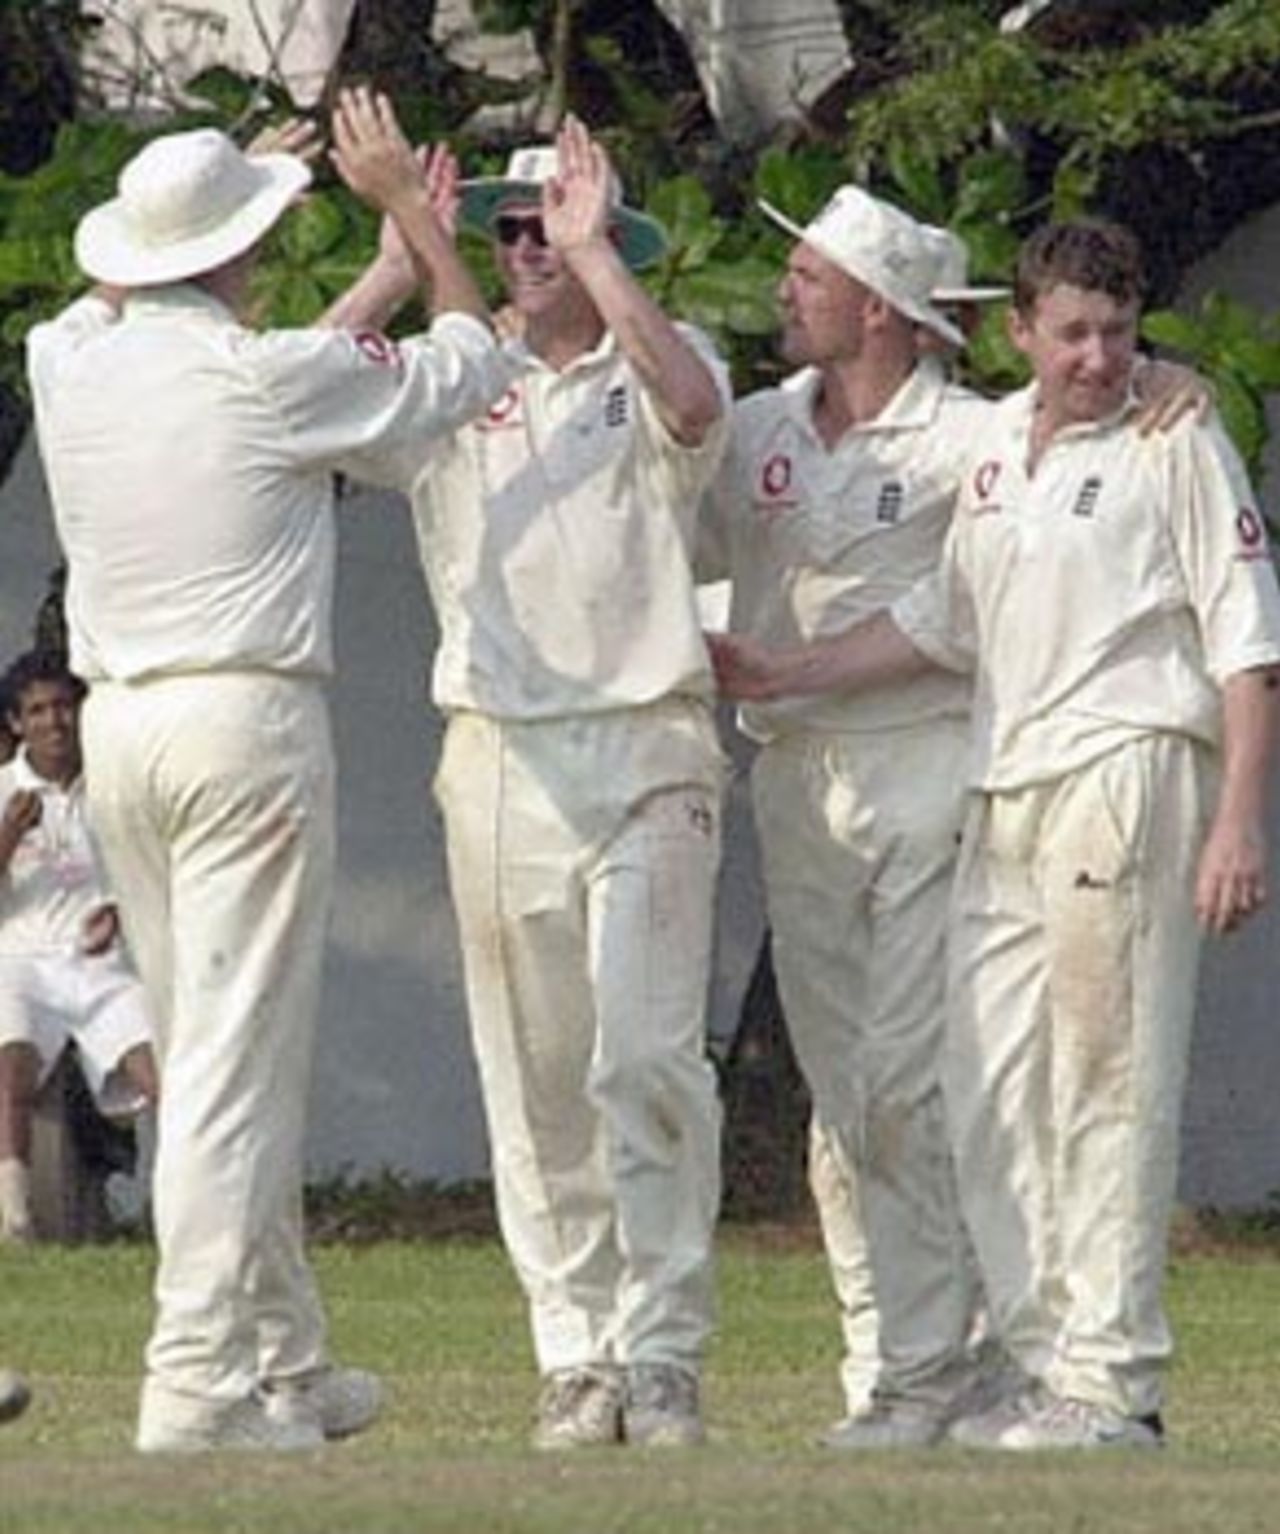 England's Matthew Hoggard (second from left) is congratulated by team mates after taking a catch on the boundary edge to dismiss Board Presidents XI batsman Niroshan Bandaratilake (not in picture) off Robert Croft (on right) on the first day of a four day cricket match on 15 February 2001 in Southern Sri Lanka at Matara . Board President's XI made 273 in their first innings.